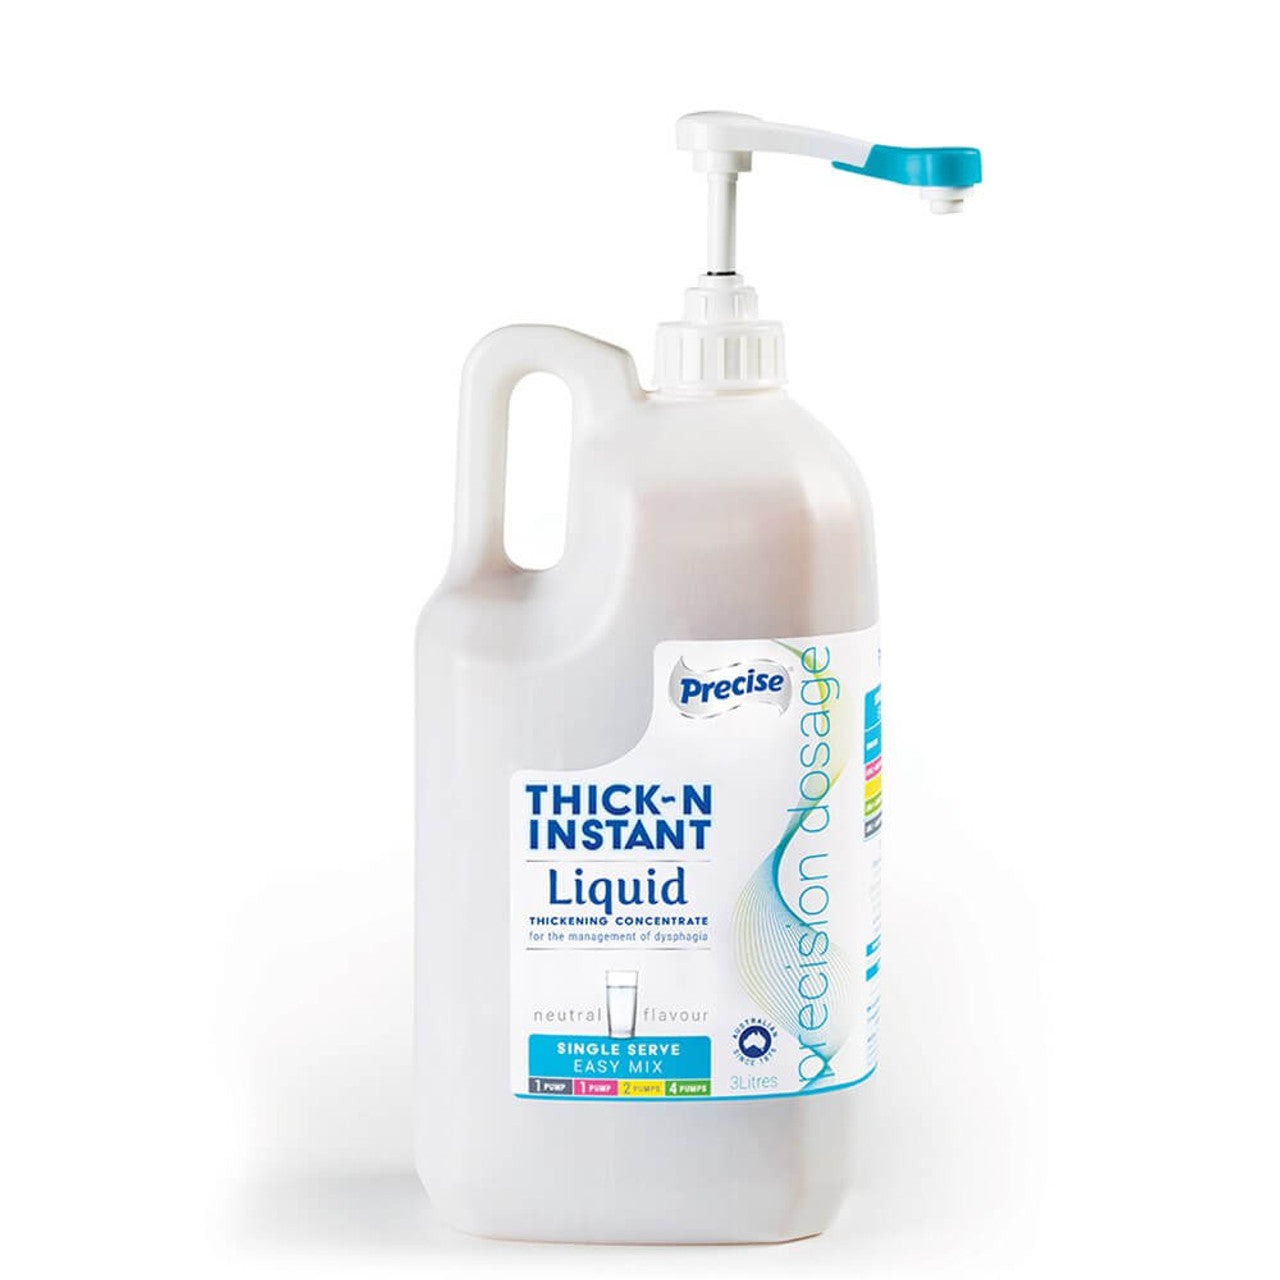 Precise Thick-N Instant 3L